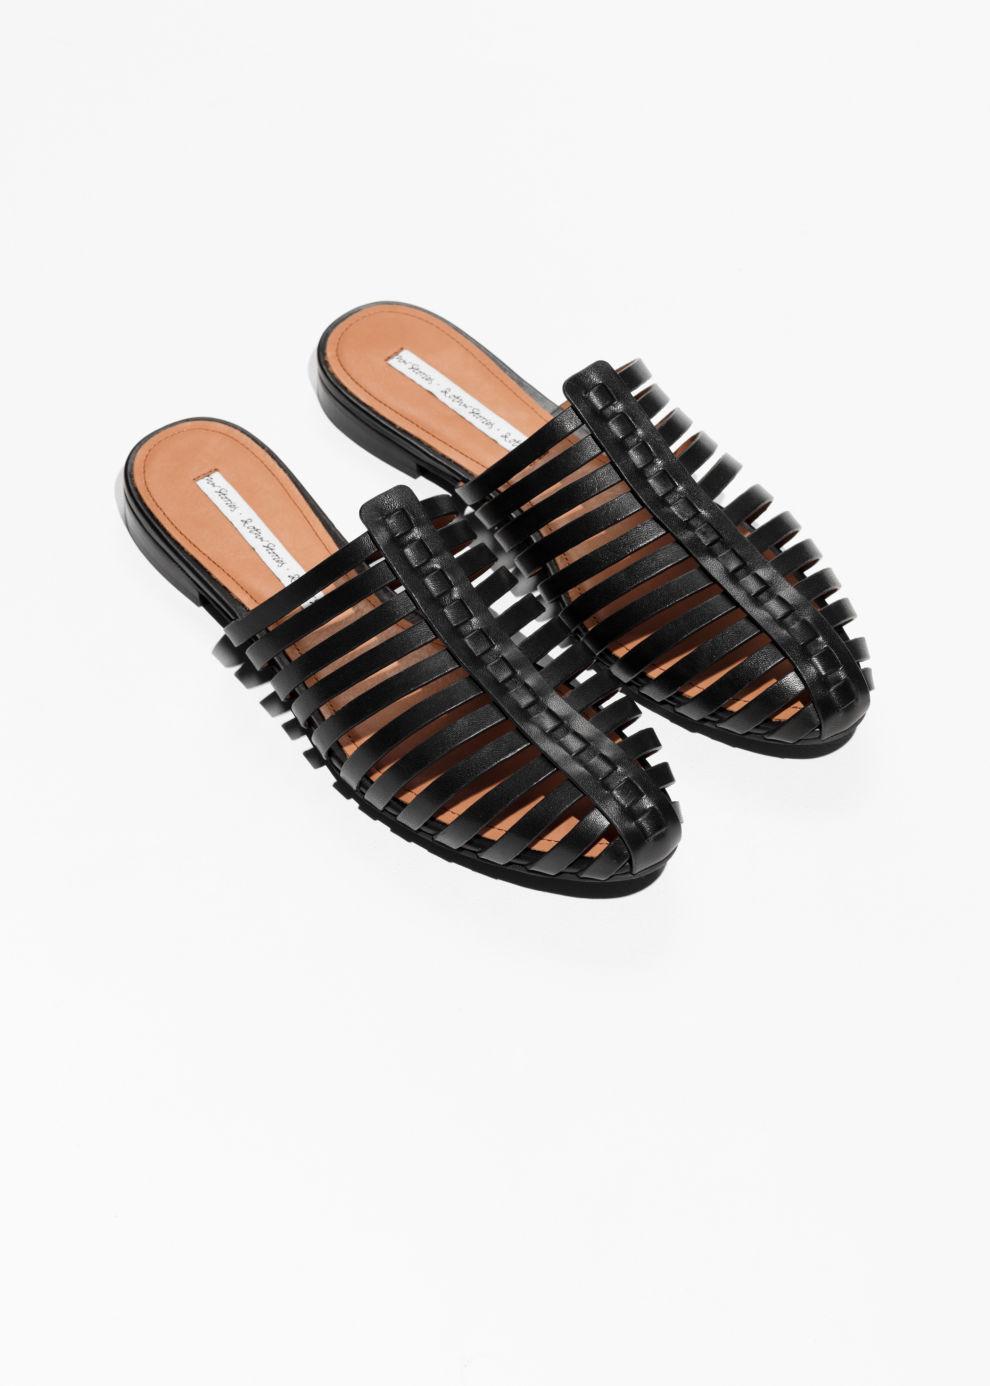 & Other Stories Leather Strappy Slippers in Black - Lyst